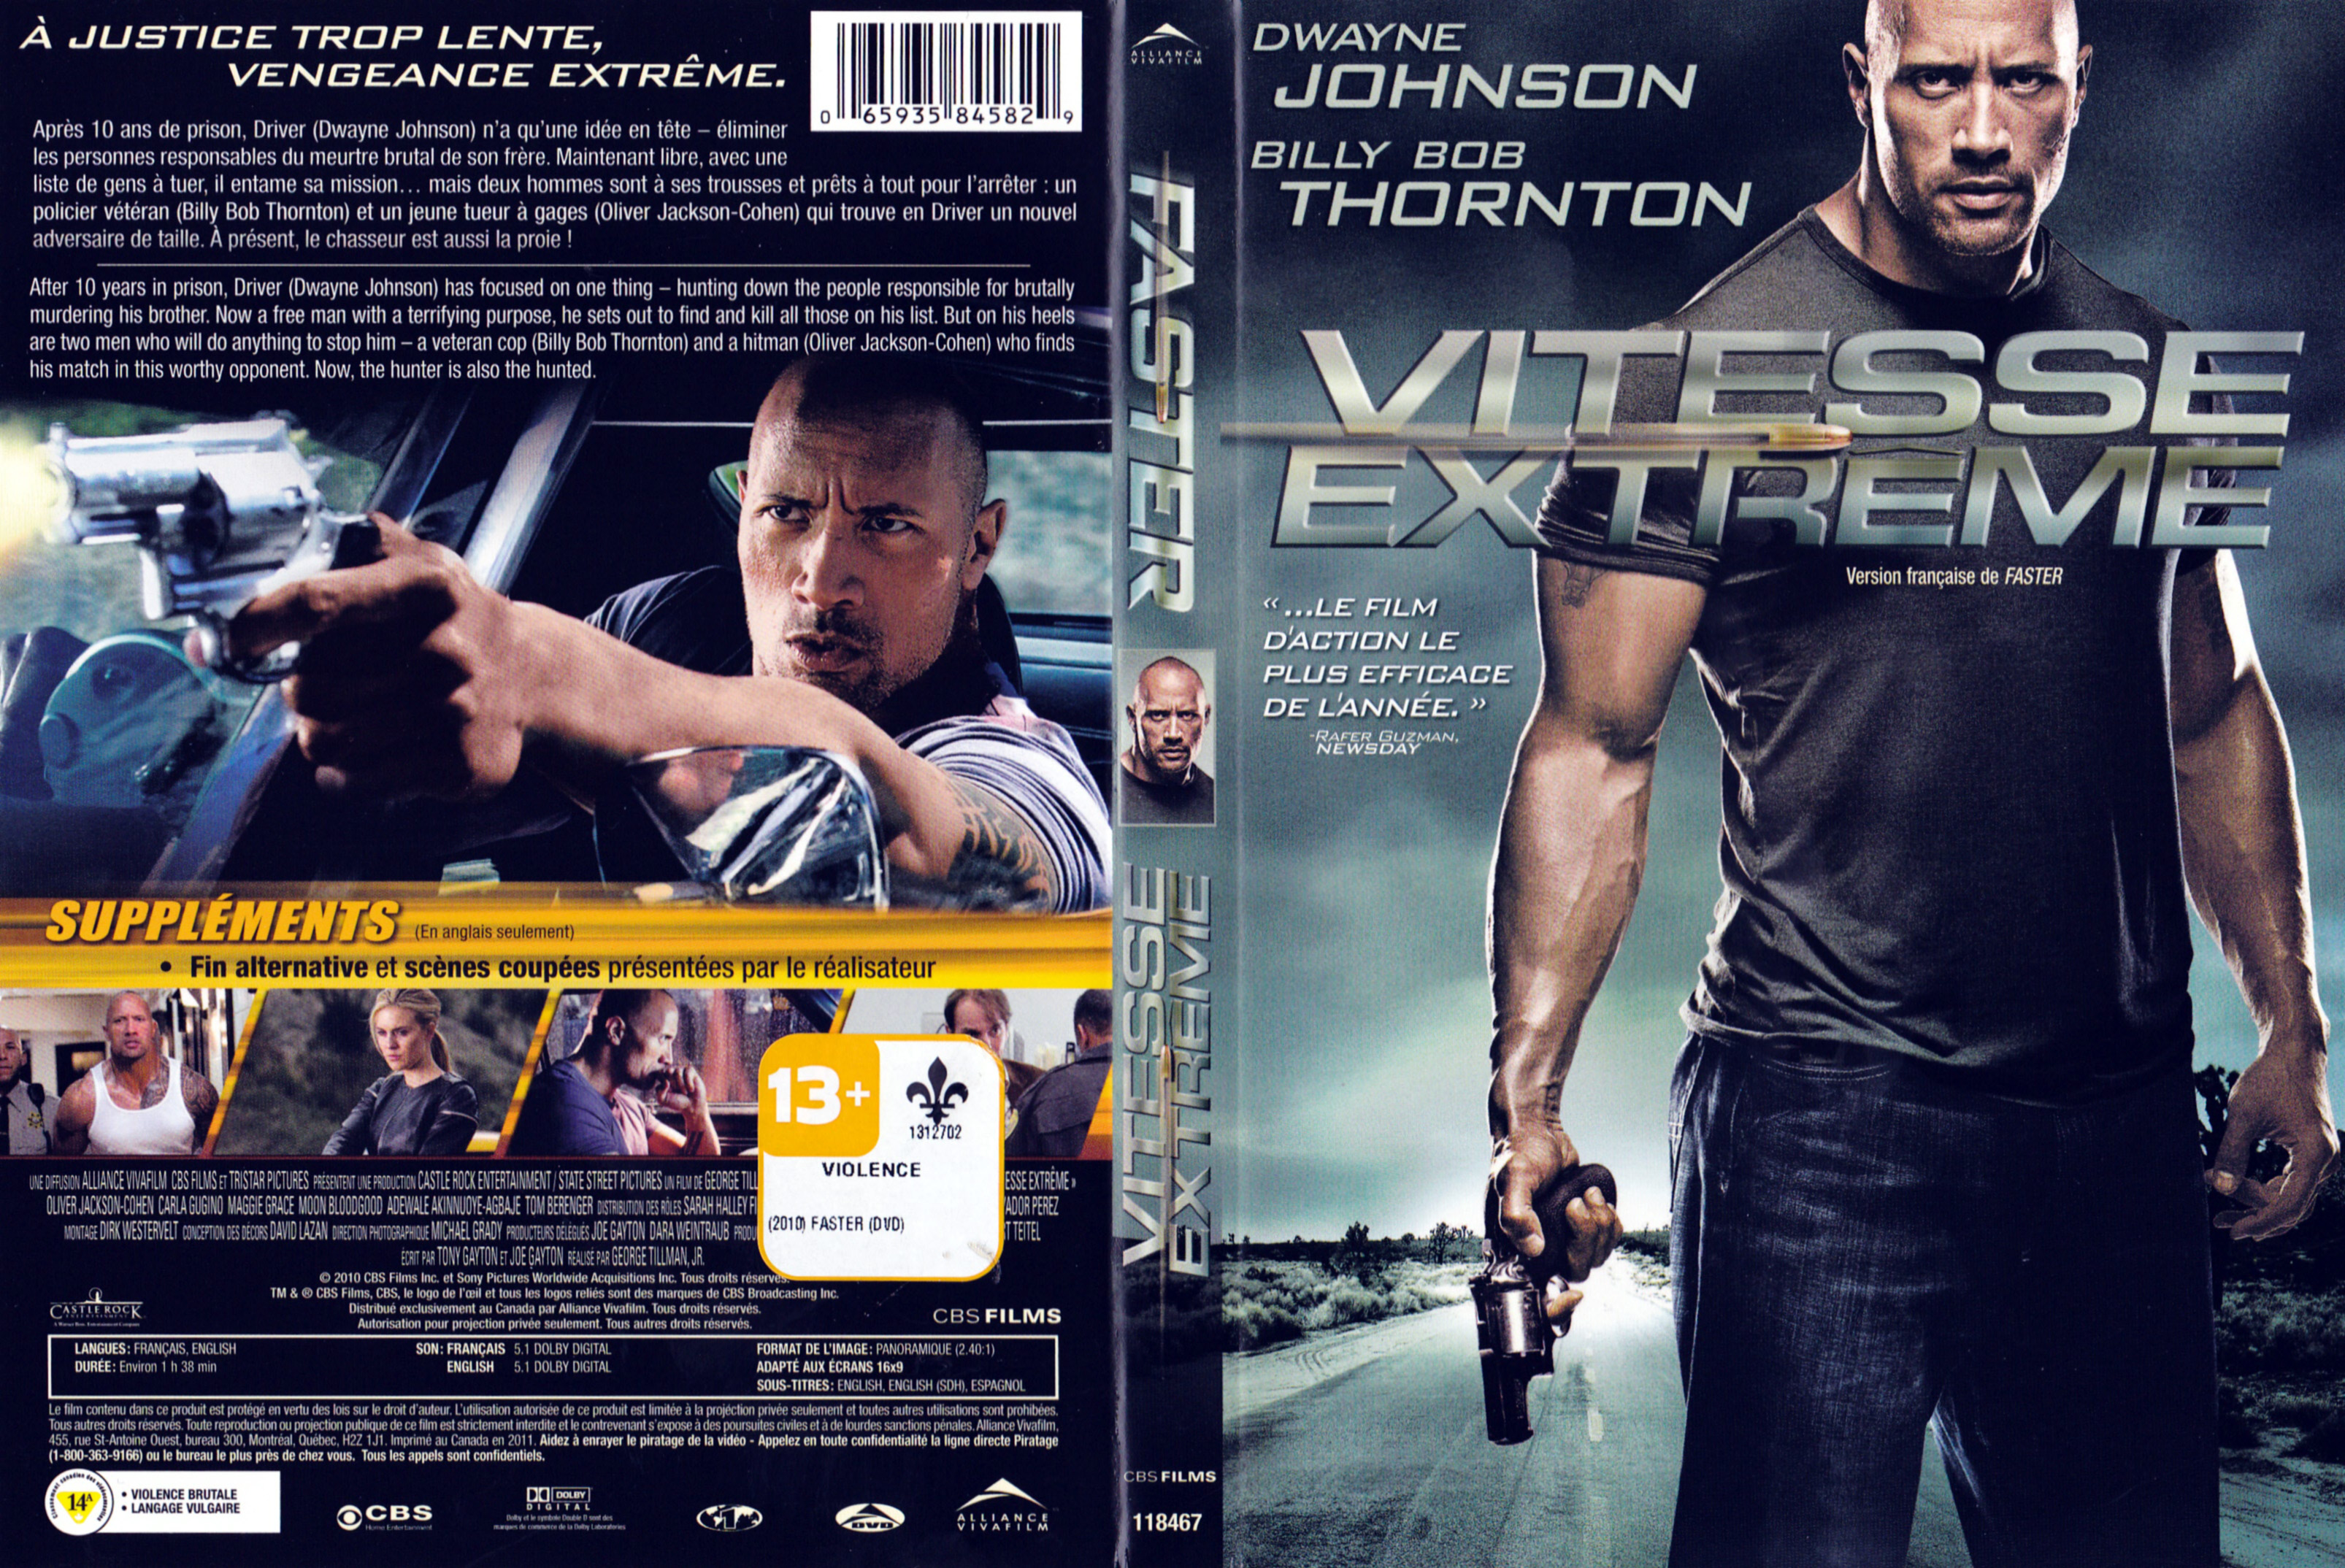 Jaquette DVD Vitesse extreme - Faster (Canadienne)